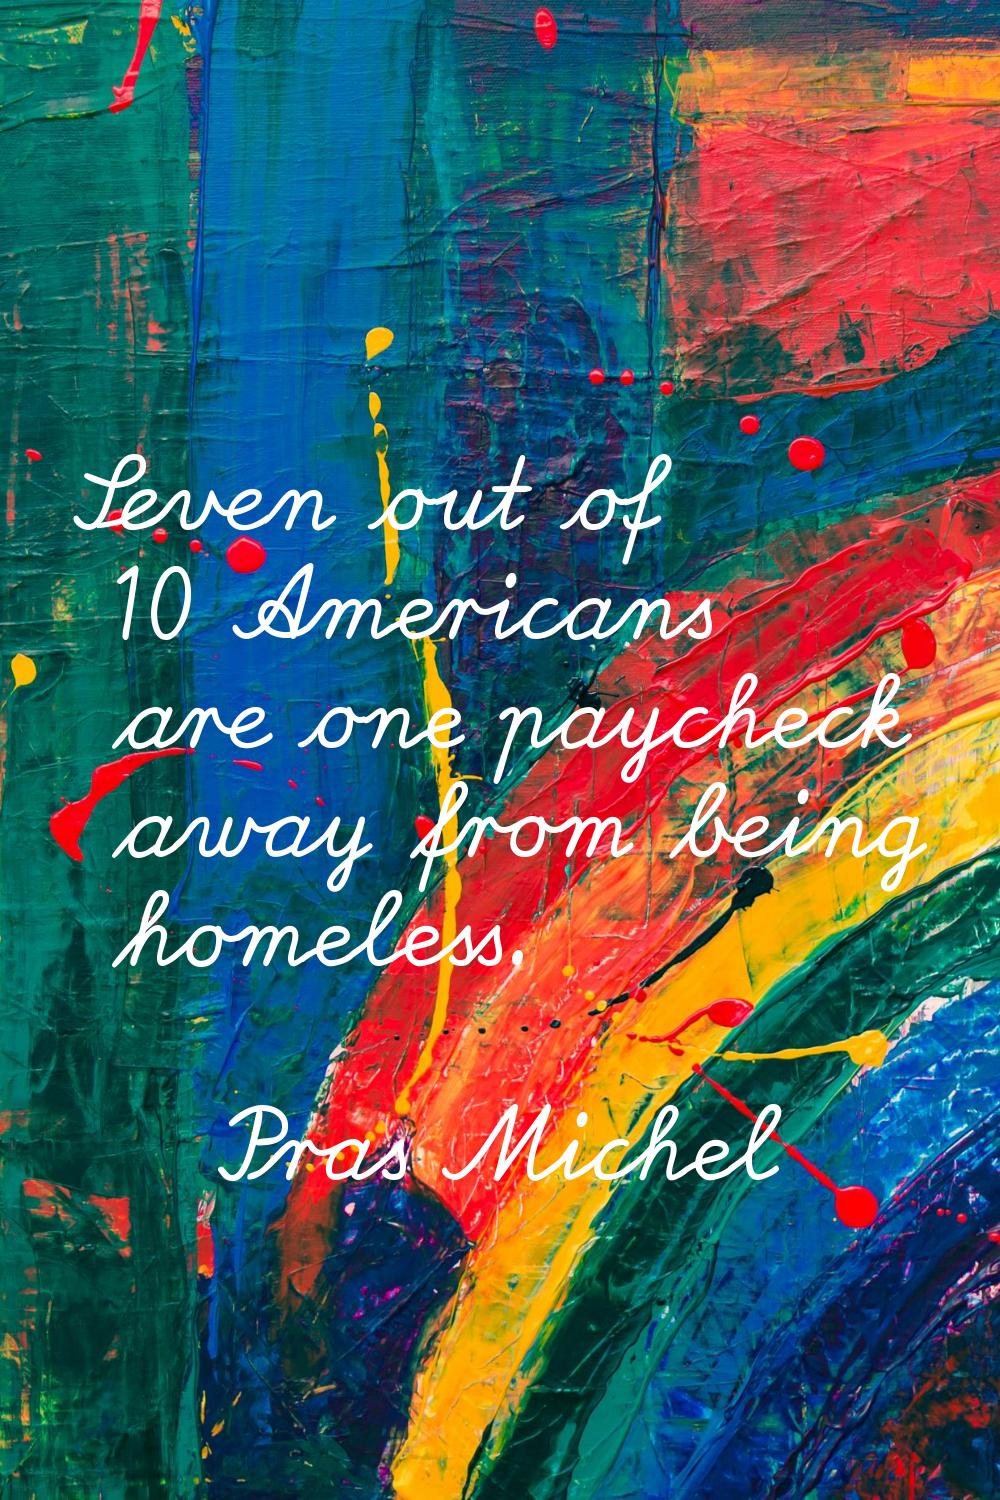 Seven out of 10 Americans are one paycheck away from being homeless.